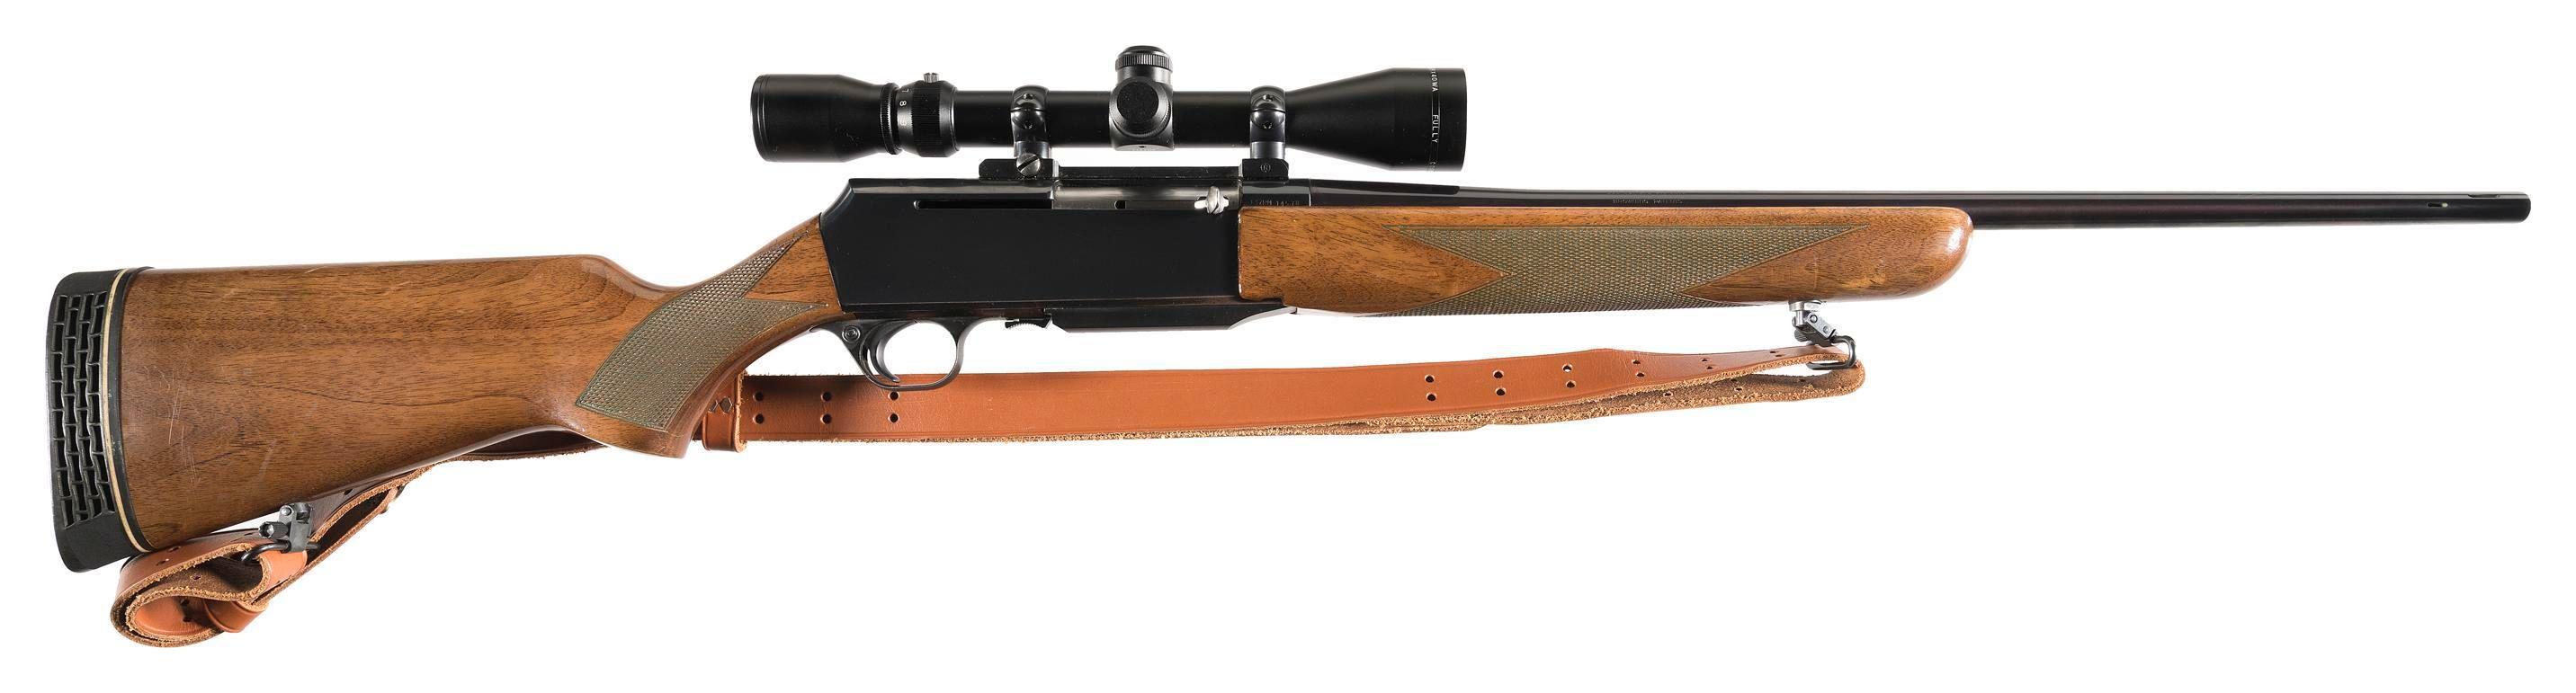 Two Browning BAR Semi-Automatic Rifles with Scopes